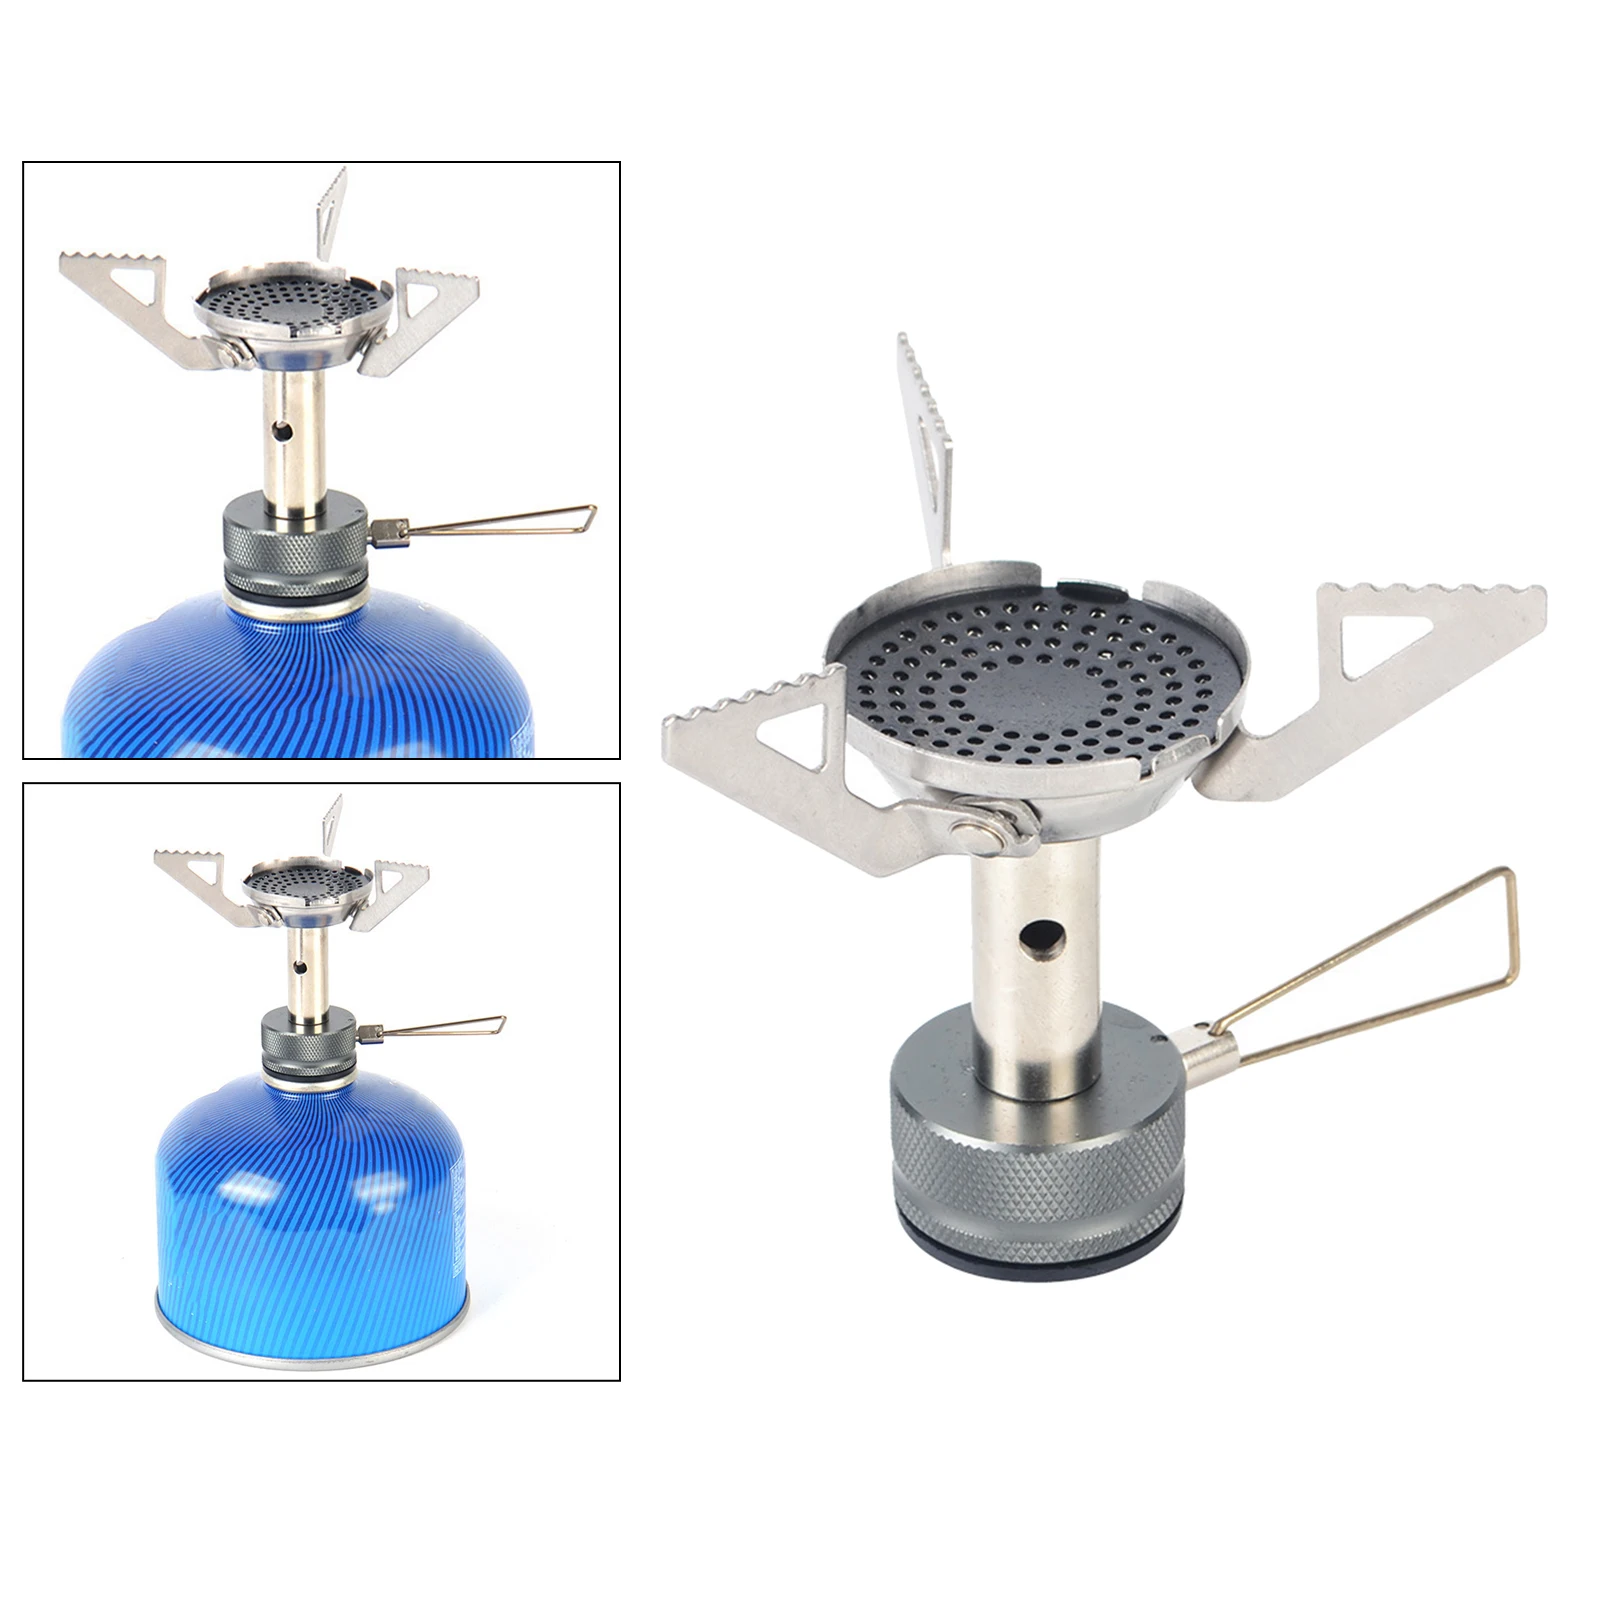 Mini Gas Stove Backpacking Canister Stove Burners Camping Outdoor Stove Cooking Foldable Hiking Butane Propane Furnace Gear